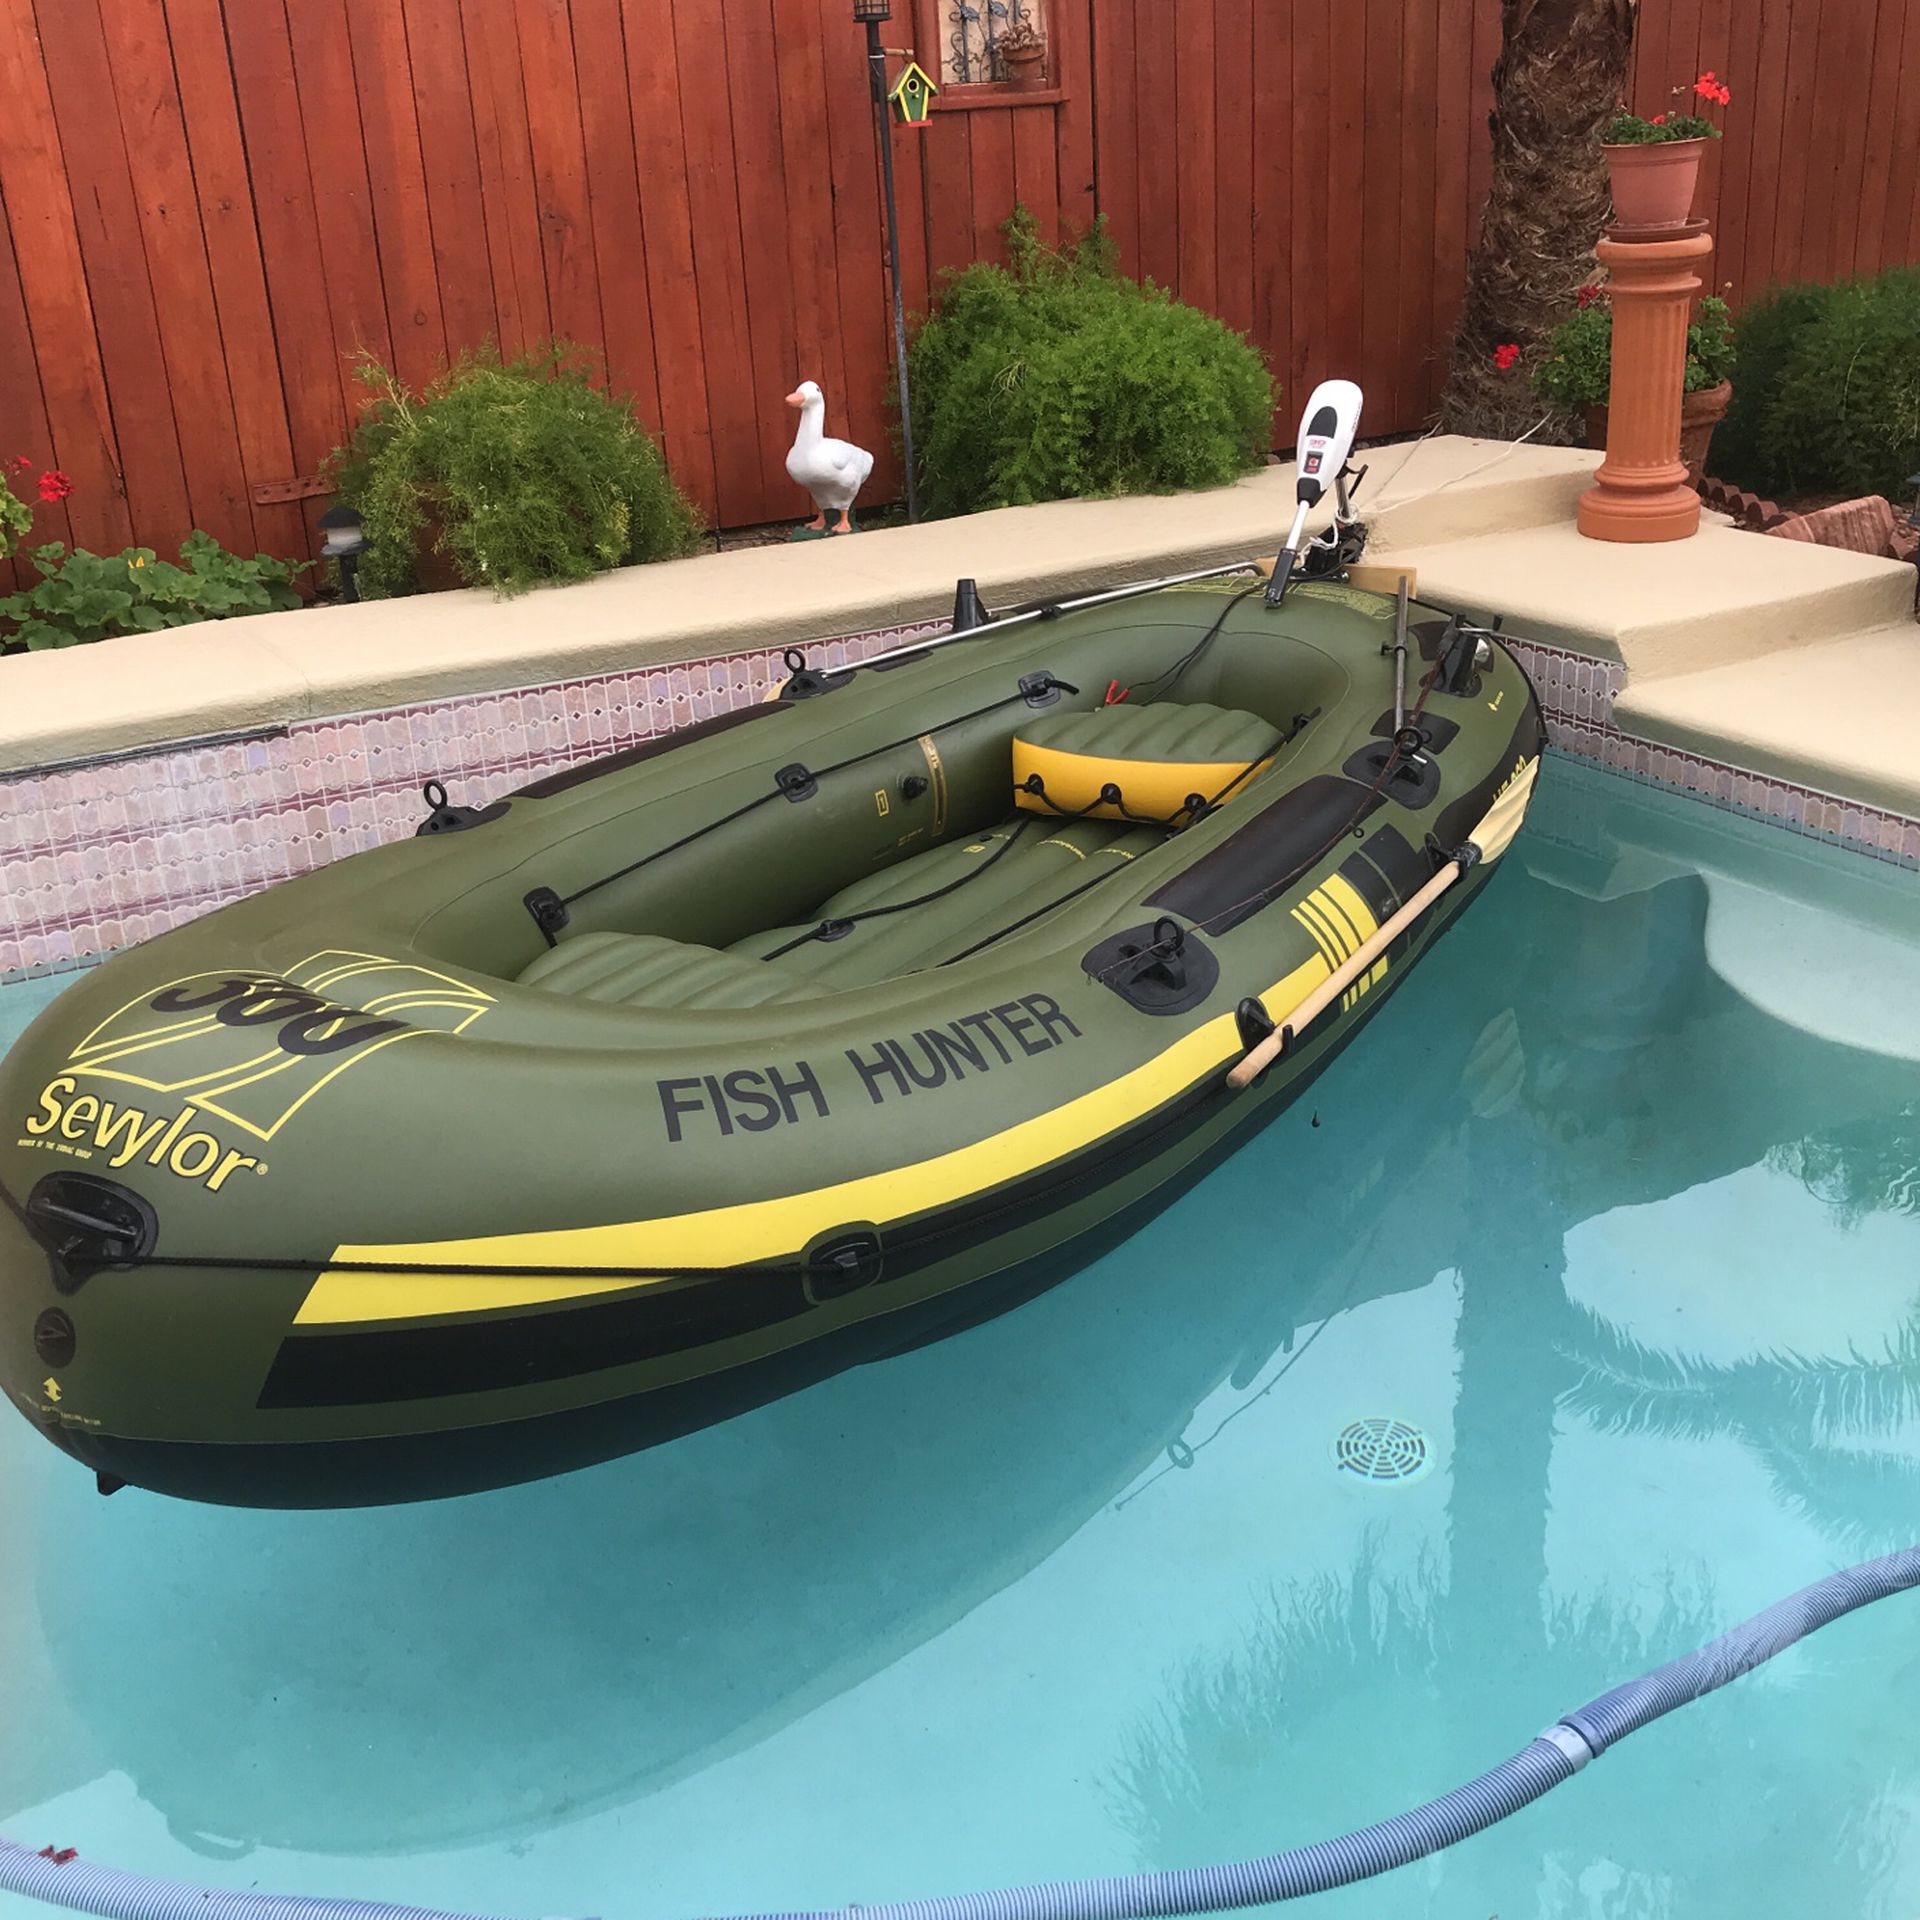 Photo 12 Ft Sevylor Inflatable Boat Mincota 30 Lb Thrust Electric Motor Also Has Floor Board Not Shown $ 550.00